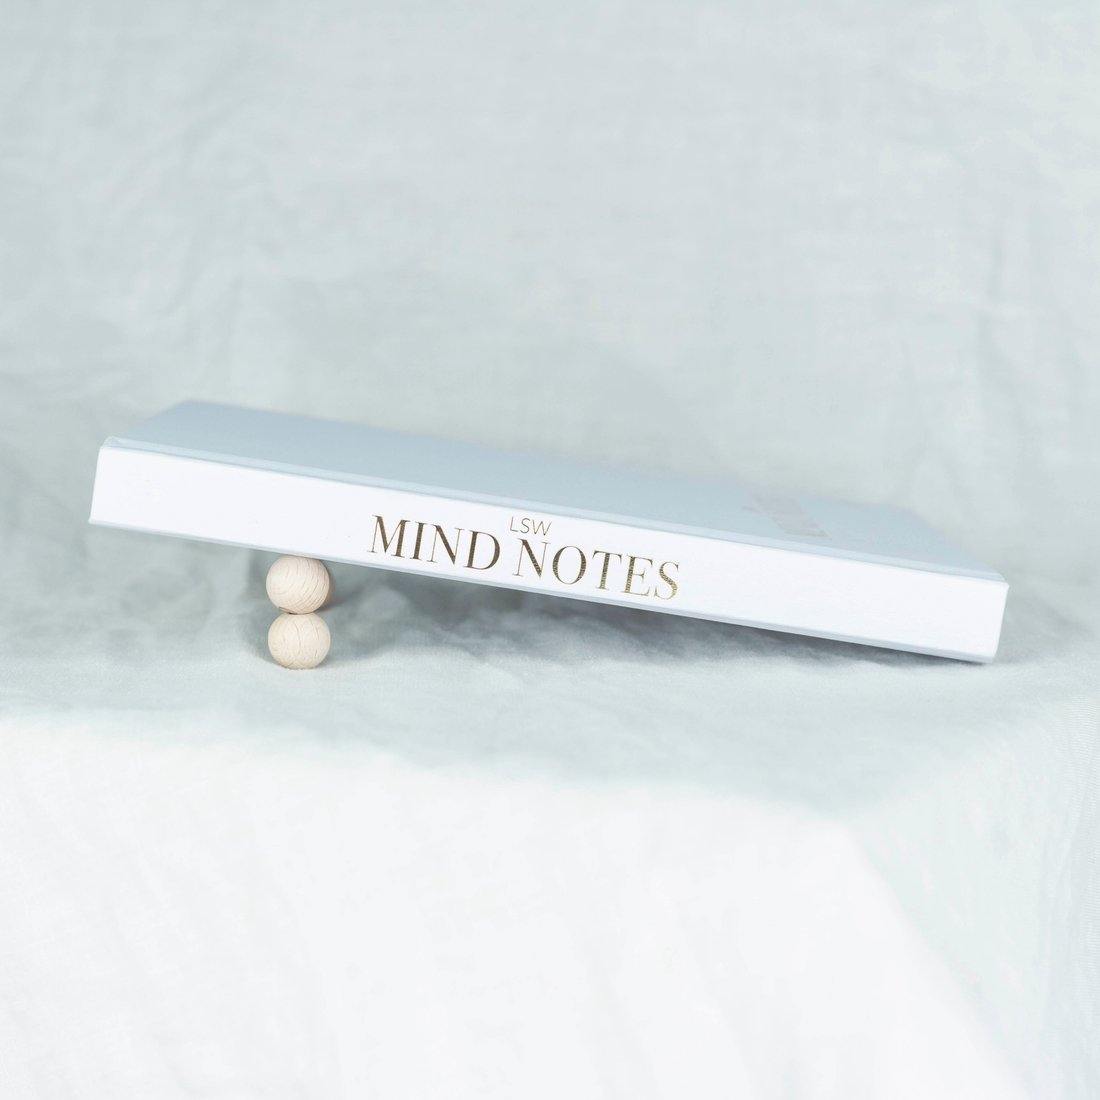 LSW Mind Notes - La Défense - Niche Beauty and Wellness